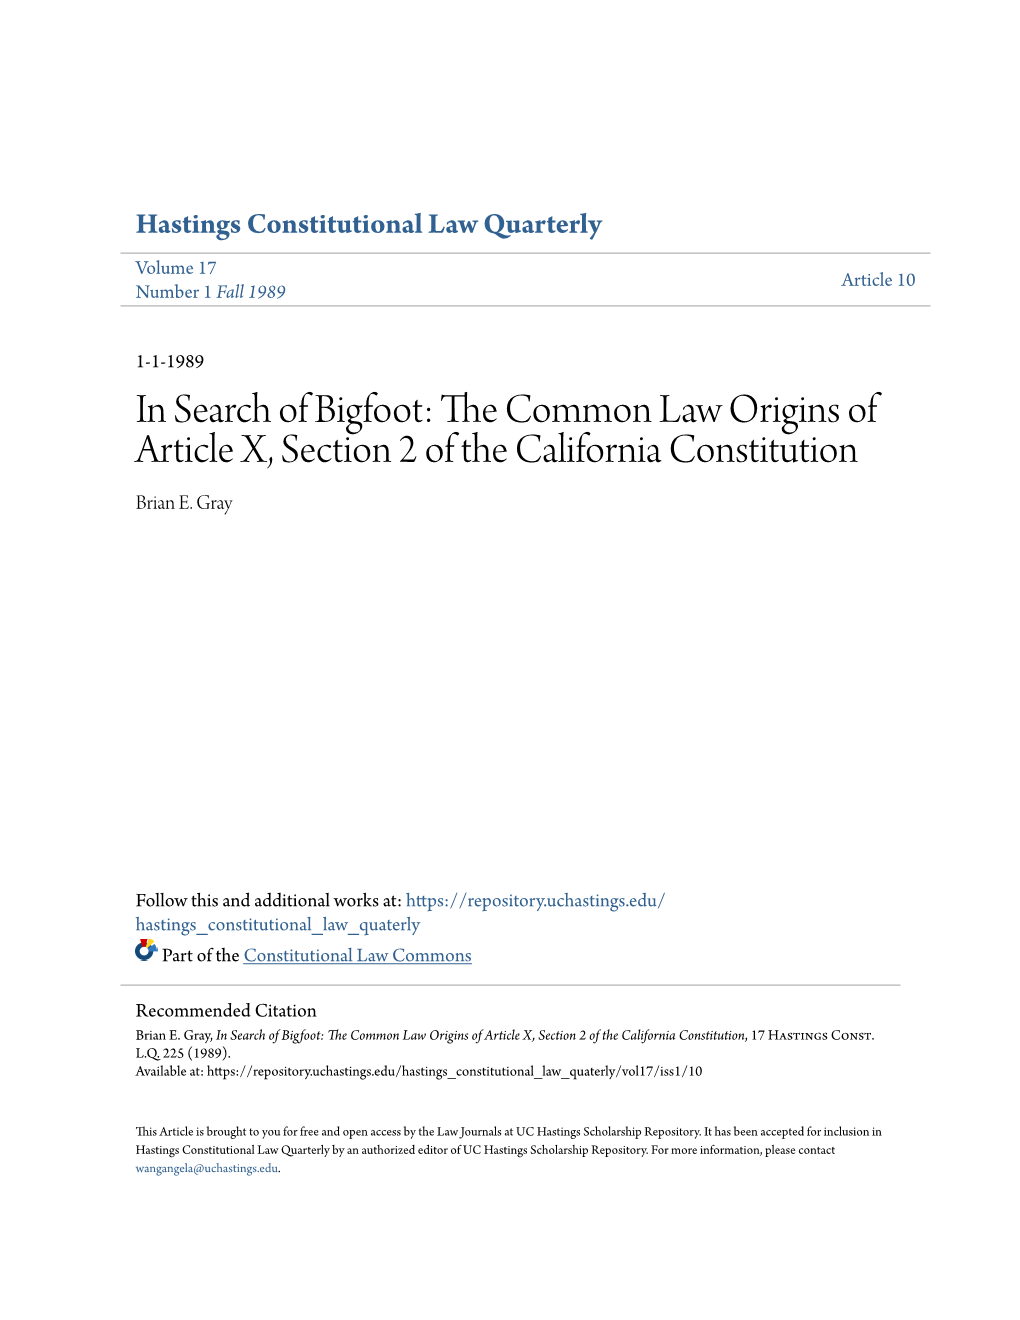 In Search of Bigfoot: the Ommonc Law Origins of Article X, Section 2 of the California Constitution Brian E